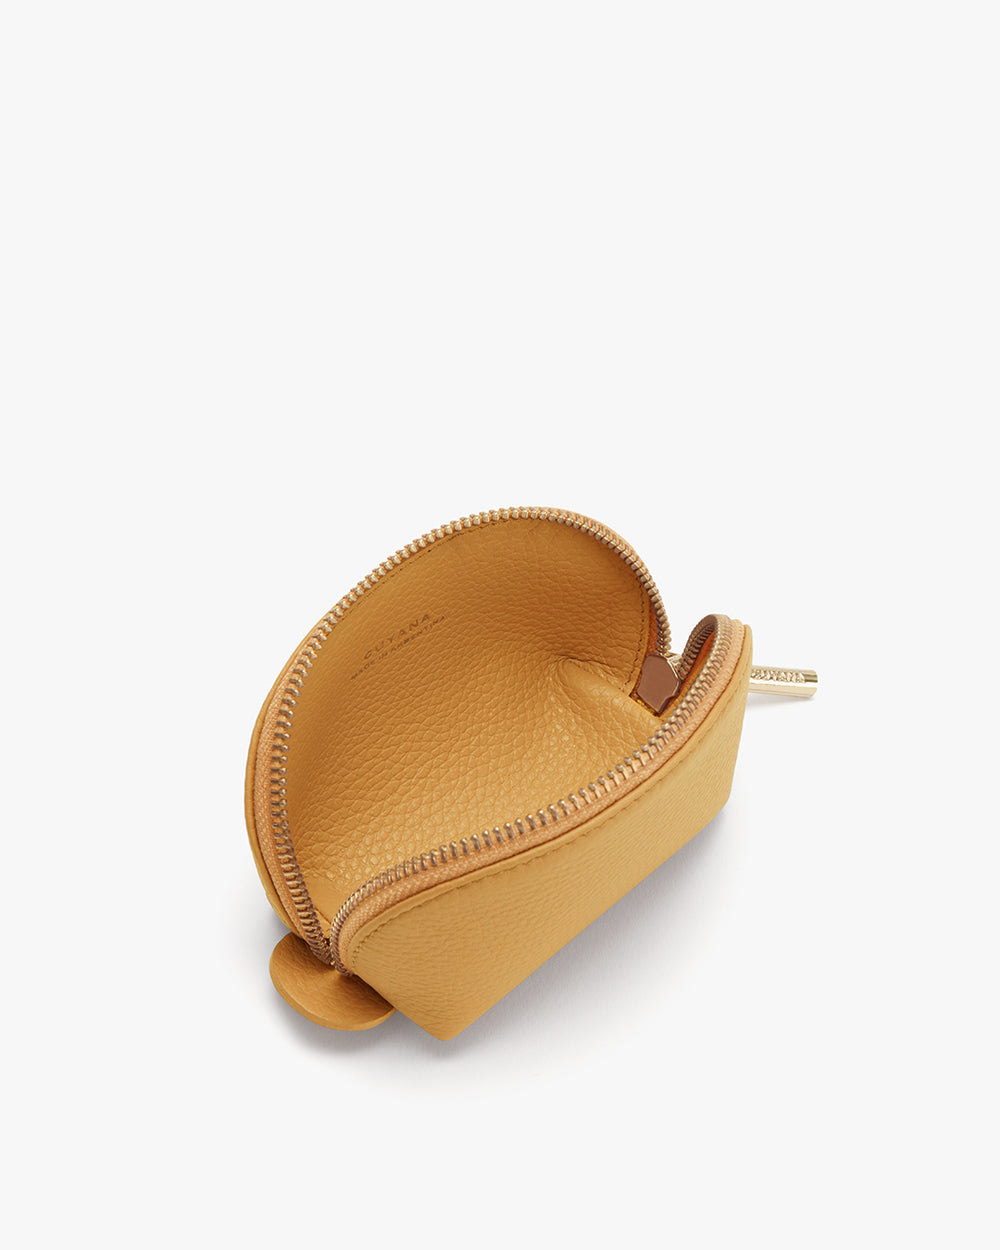 Open small pouch with zipper on a plain background.